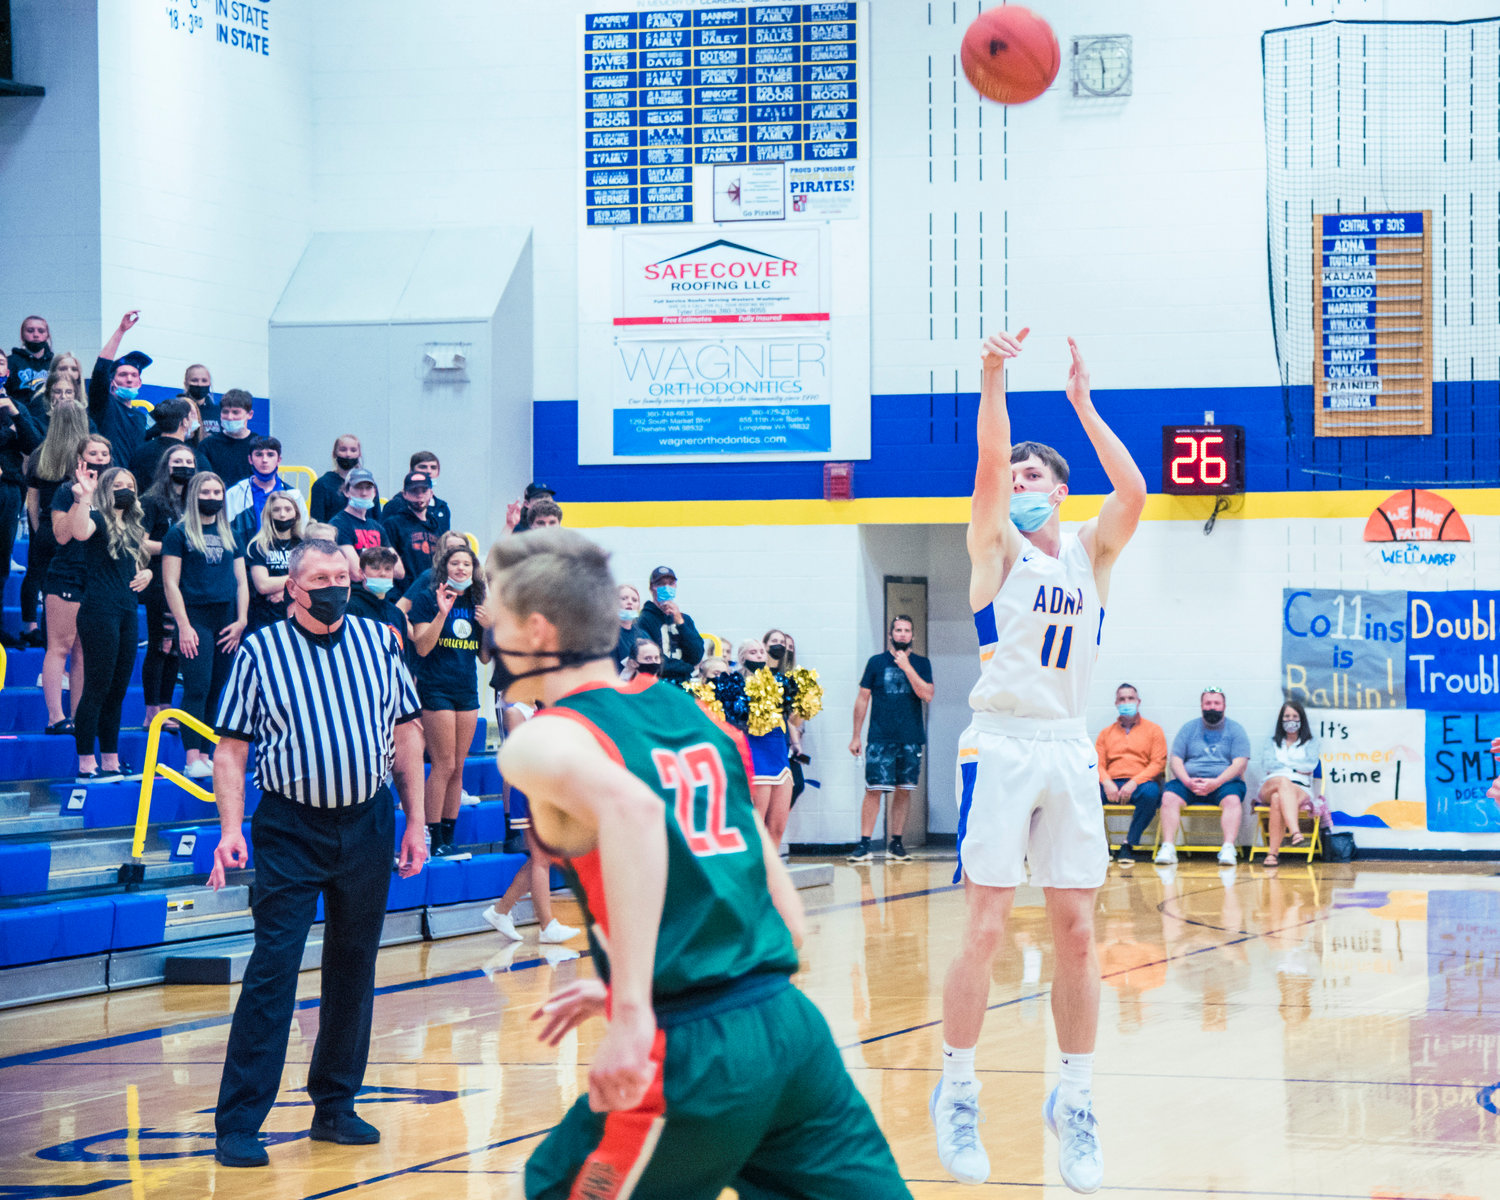 Adna’s Chase Collins (11) makes a deep shot during a game against MWP on Tuesday.